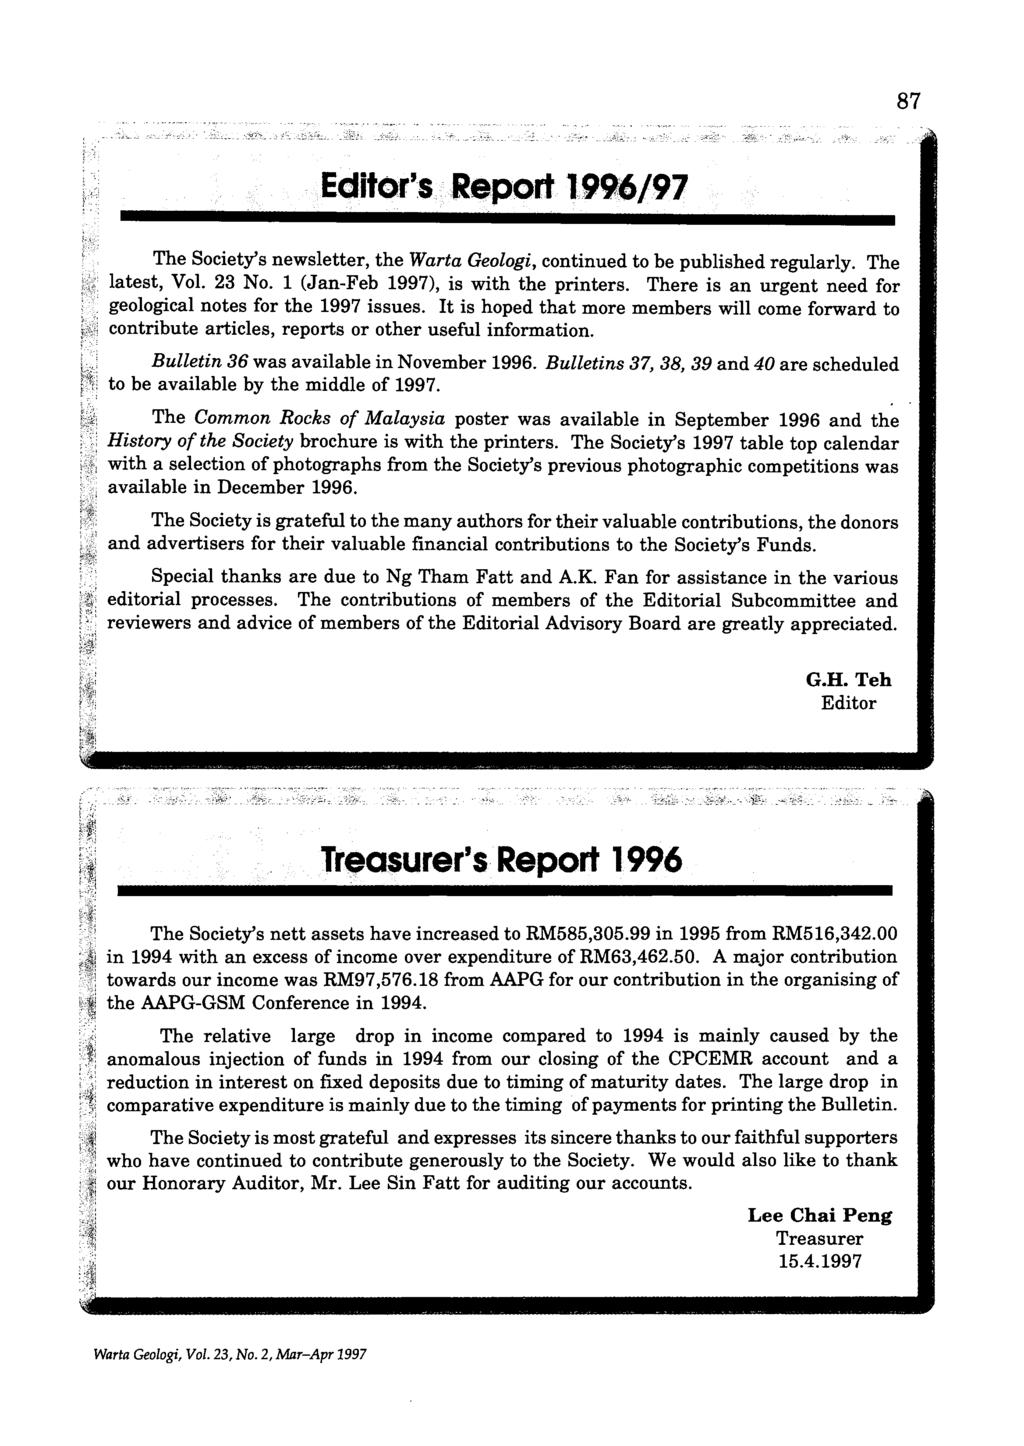 87 Editor'.s Report 1996/97 The Society's newsletter, the Warta Geologi, continued to be published regularly. The latest, VoL 23 No.1 (Jan-Feb 1997), is with the printers.